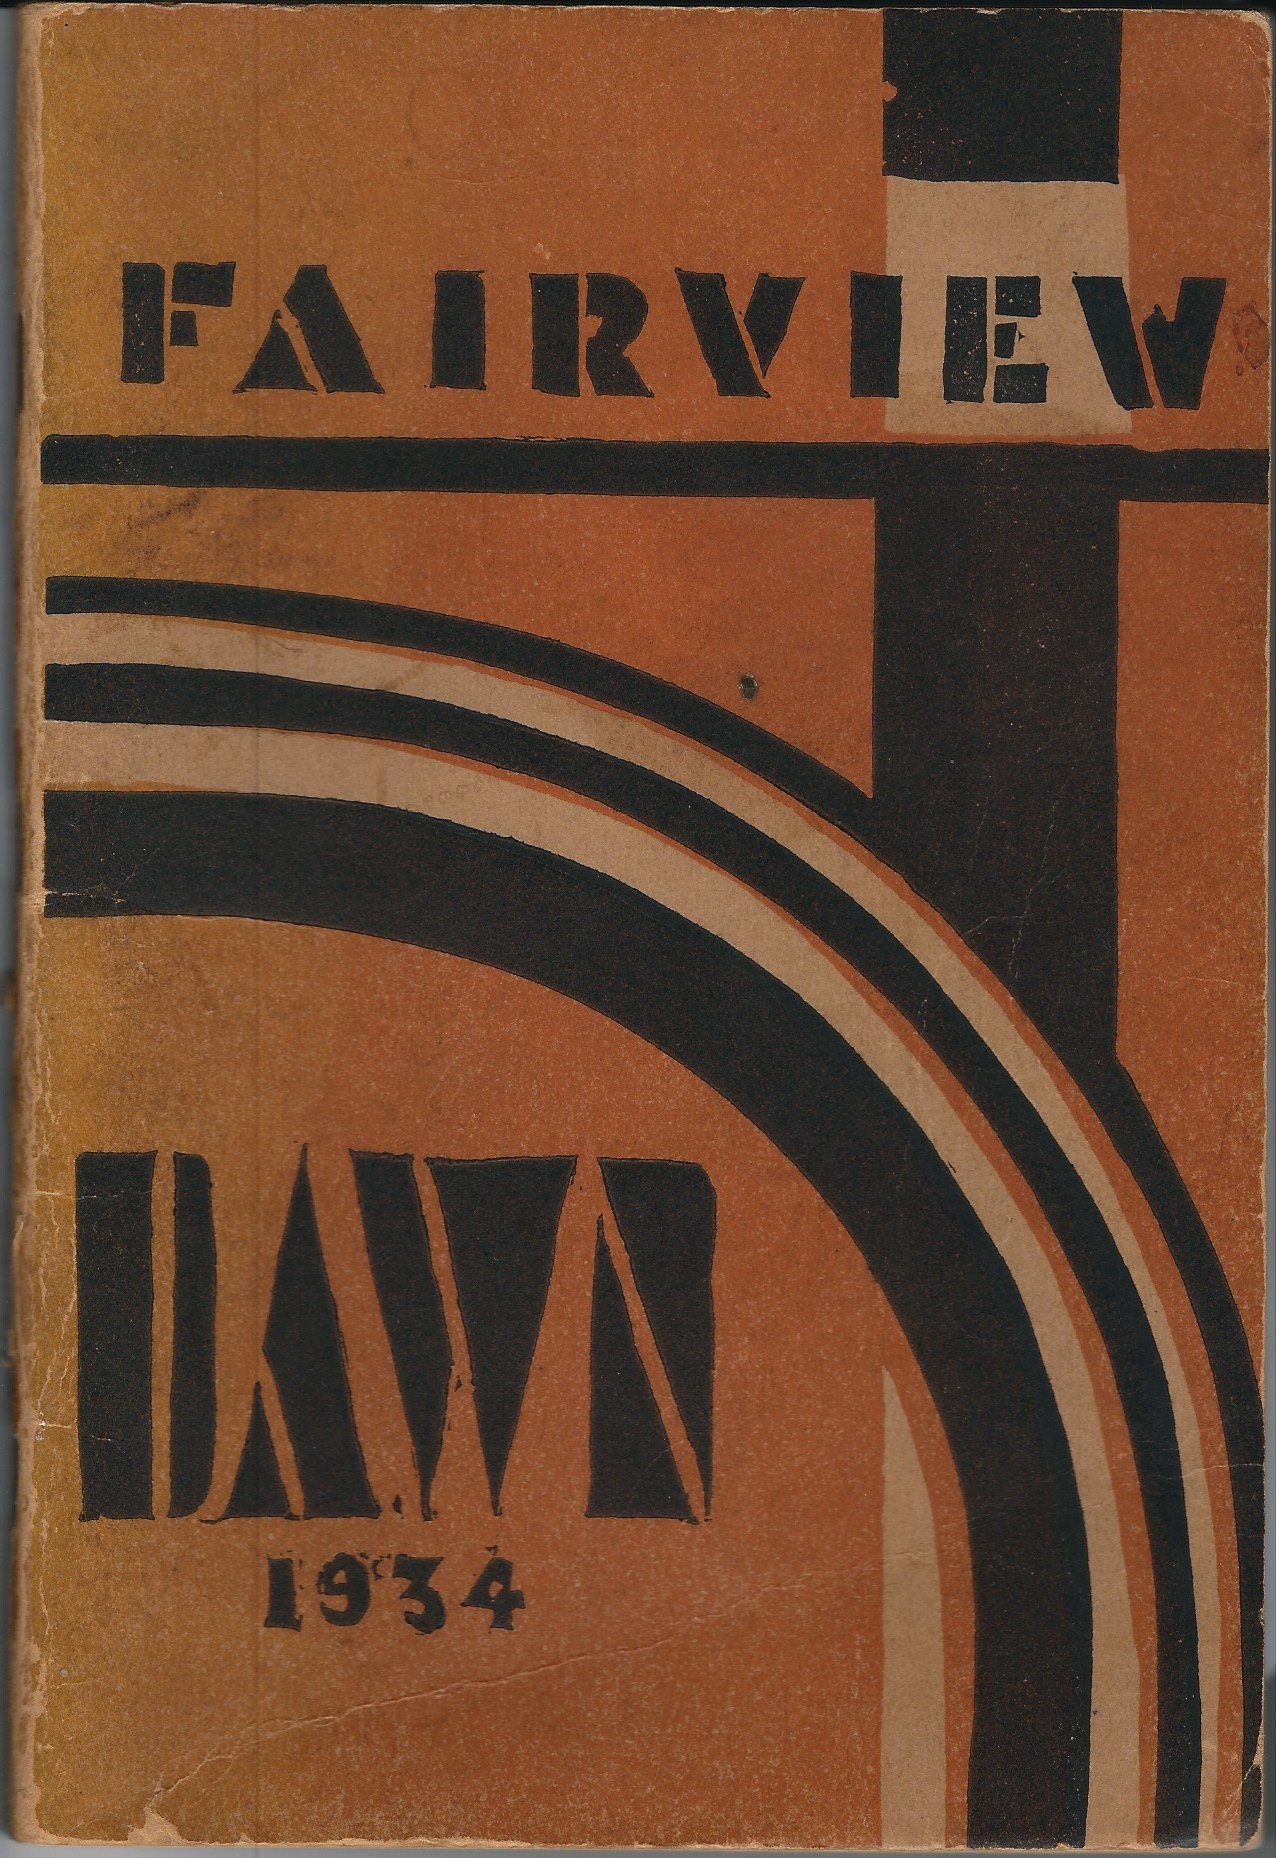 Fairview Dawn booklet from 1934